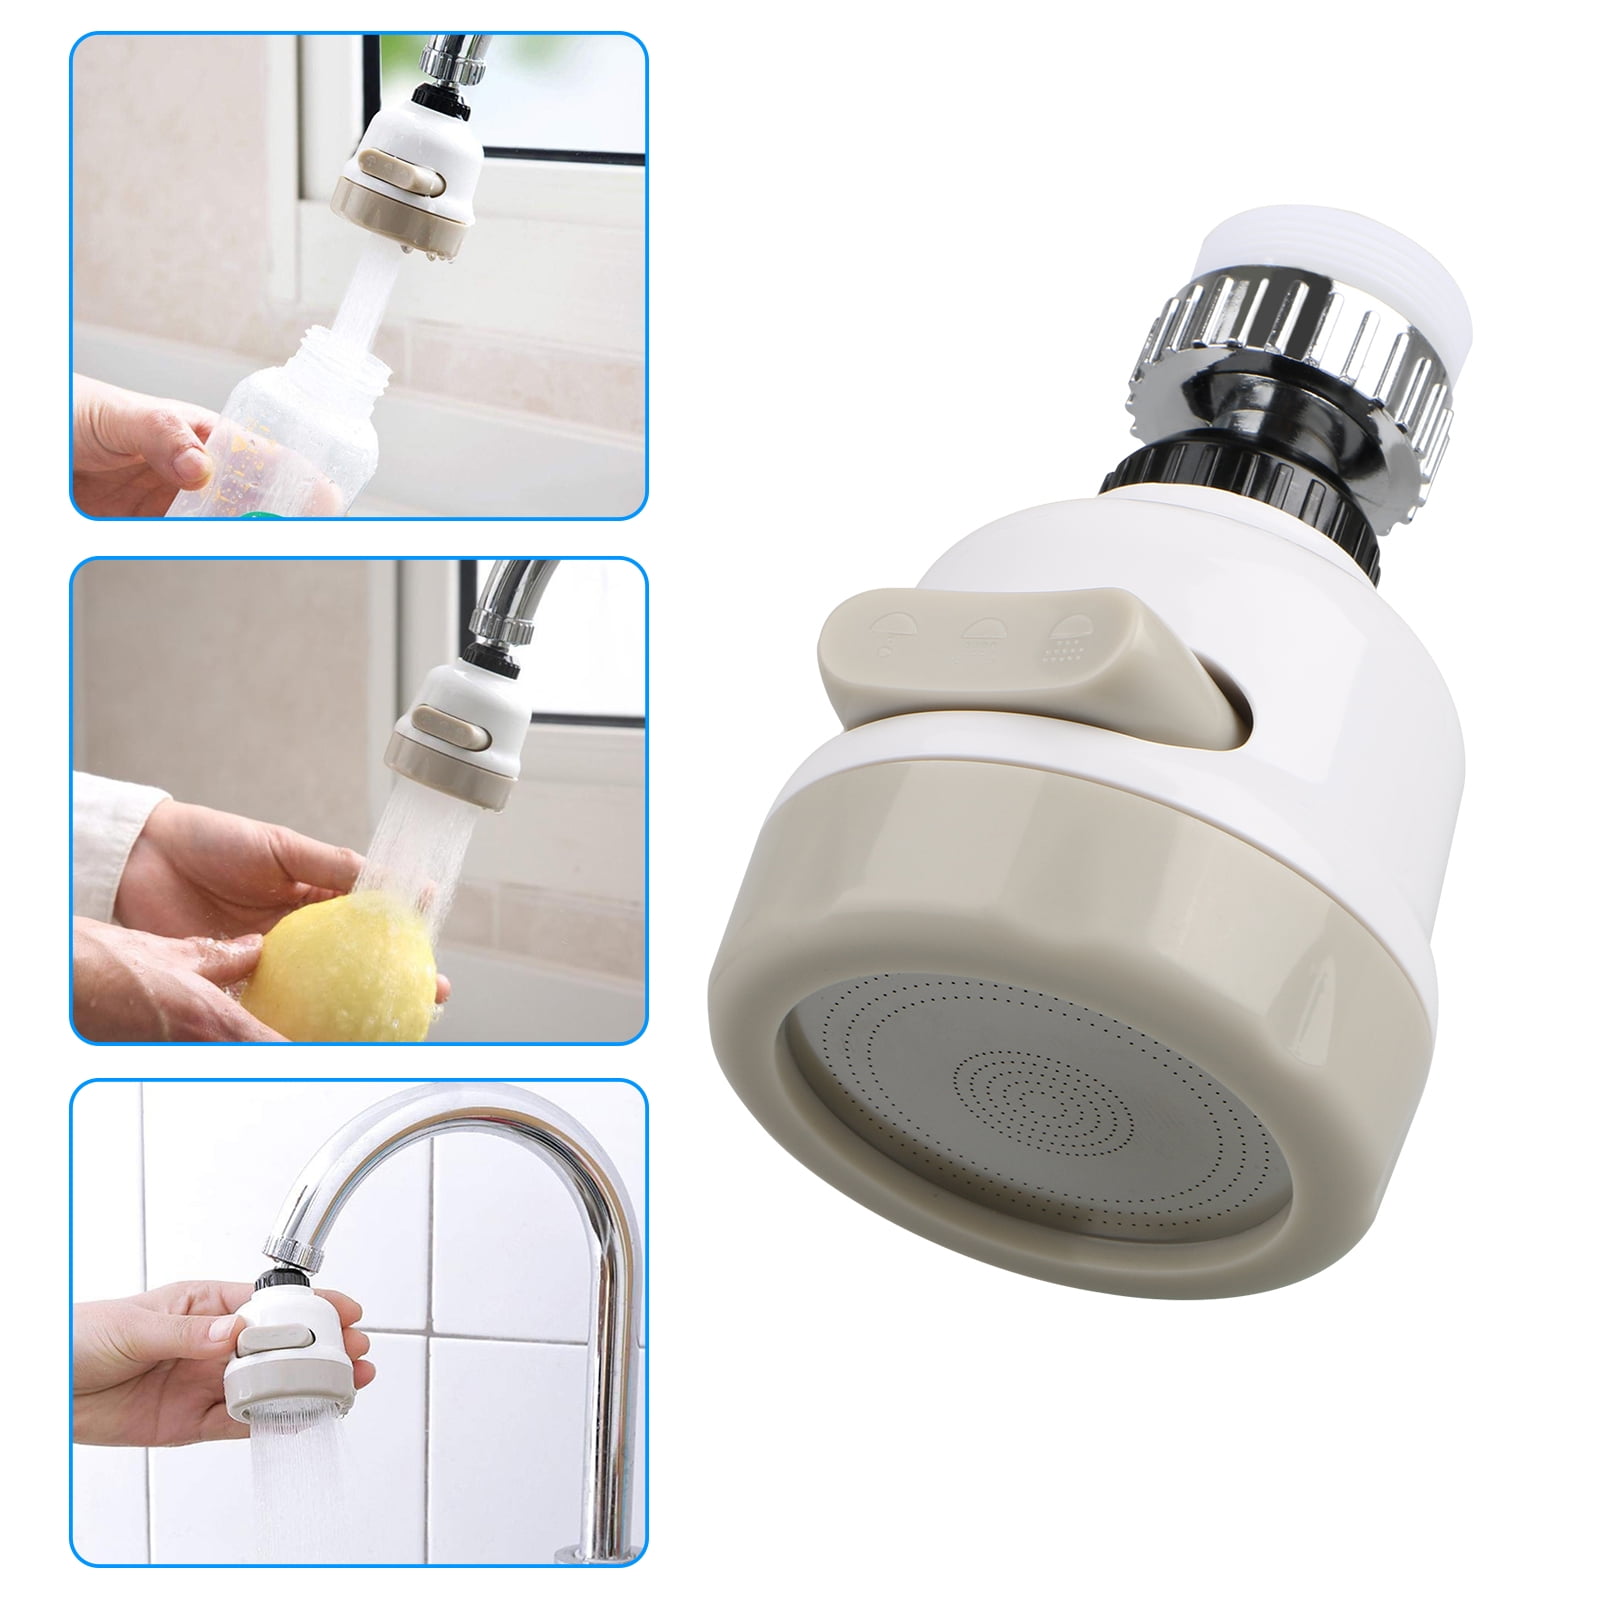 2 Pieces Kitchen Tap Universal Faucet Extension 360° Rotatable Faucet Sprayer for Bathroom Kitchen Tap Nozzle Filter Adapter